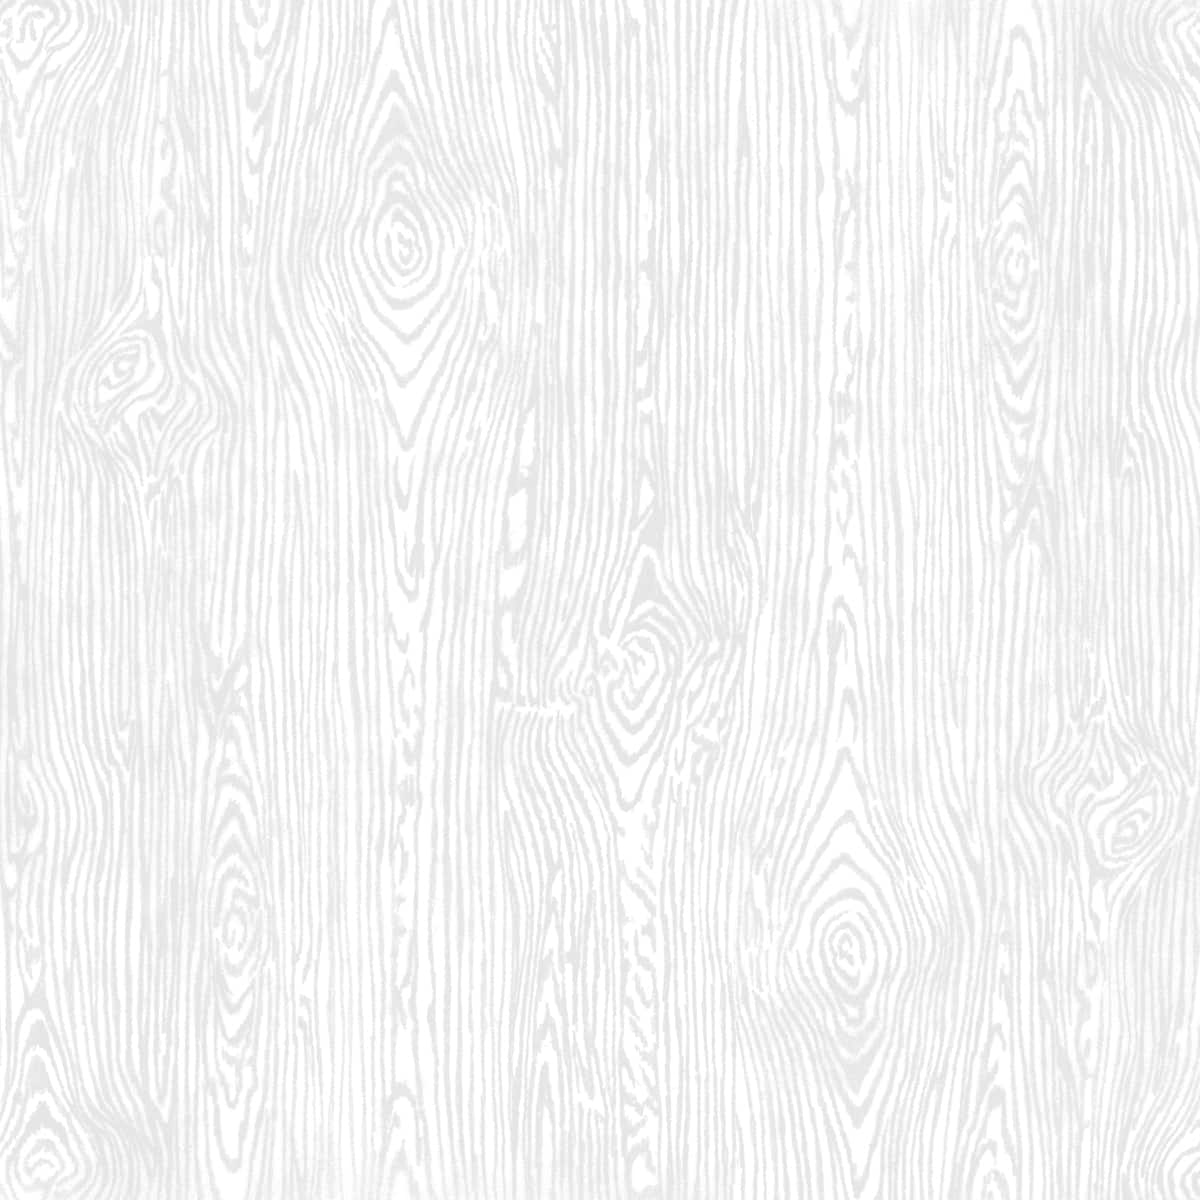 American Crafts™ White Woodgrain 12 x 12 Textured Cardstock, 25 Sheets